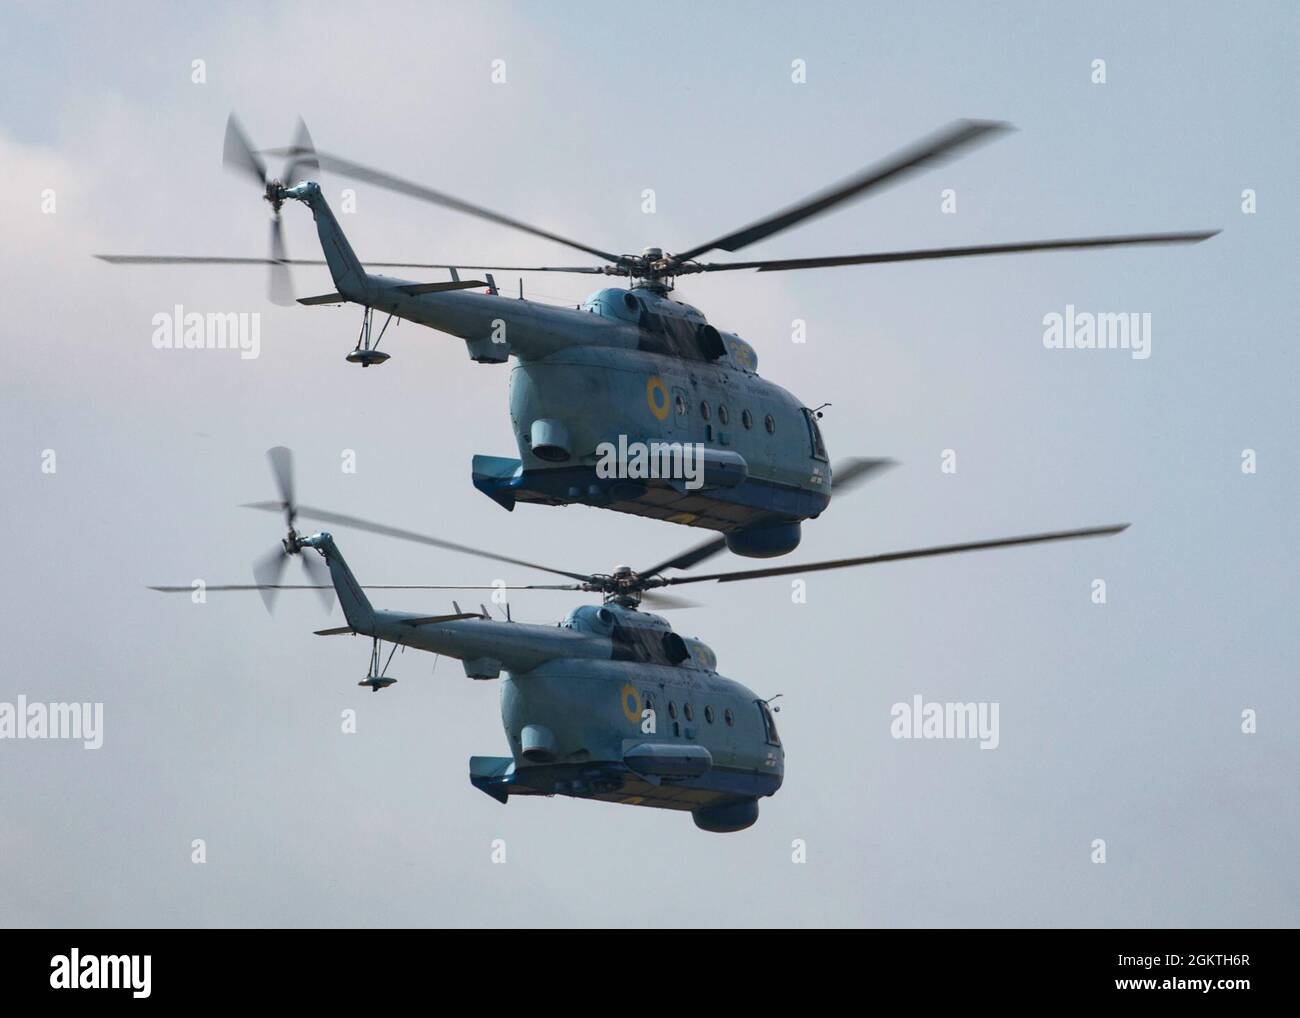 210630-N-BM428-0247 MYKOLAIV MILITARY AIRBASE, Ukraine (June 30, 2021) Two Ukrainian Mi-8 helicopters fly in formation during an air demonstration portion of Exercise Sea Breeze 2021 on Mykolaiv Military Airbase, Ukraine, June 30, 2021. Exercise Sea Breeze is a multinational maritime exercise cohosted by the U.S. Sixth Fleet and the Ukrainian Navy since 1997. Sea Breeze 2021 is designed to enhance interoperability of participating nations and strengthens maritime security and peace in the region. Stock Photo